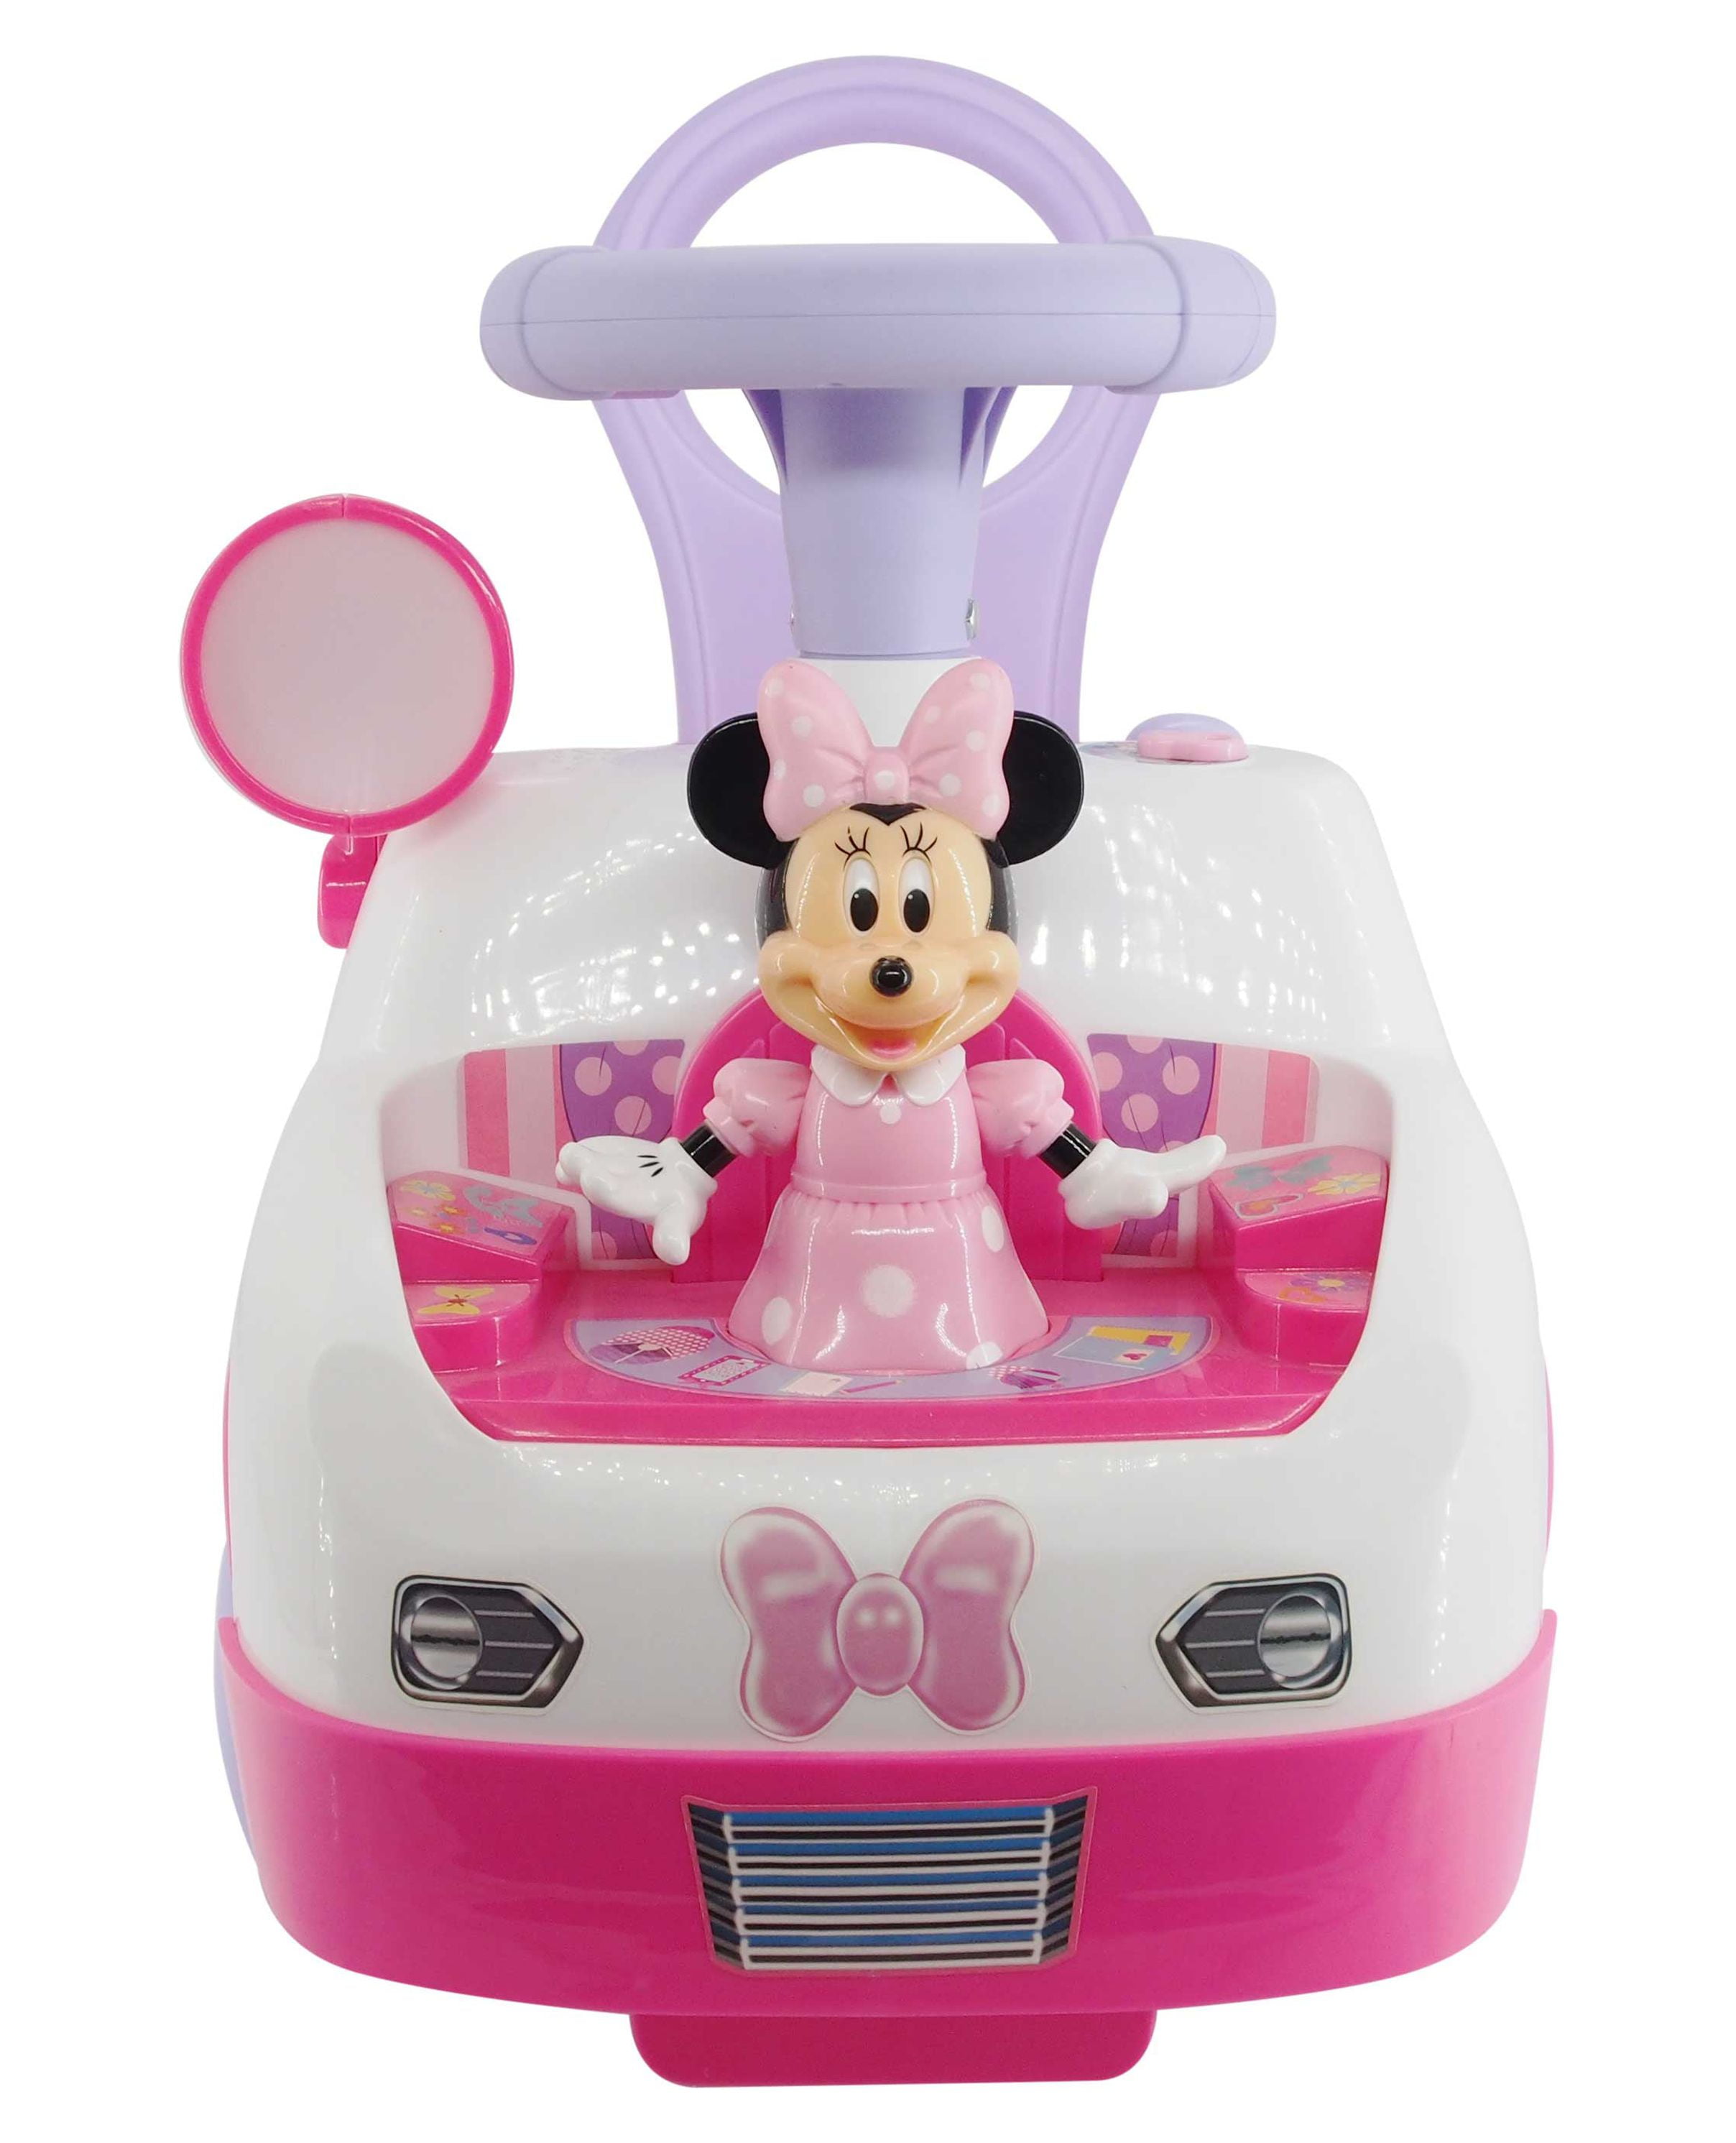 Dancing with Mouse Sounds Interactive Kiddieland Minnie Car Activity Ride-On